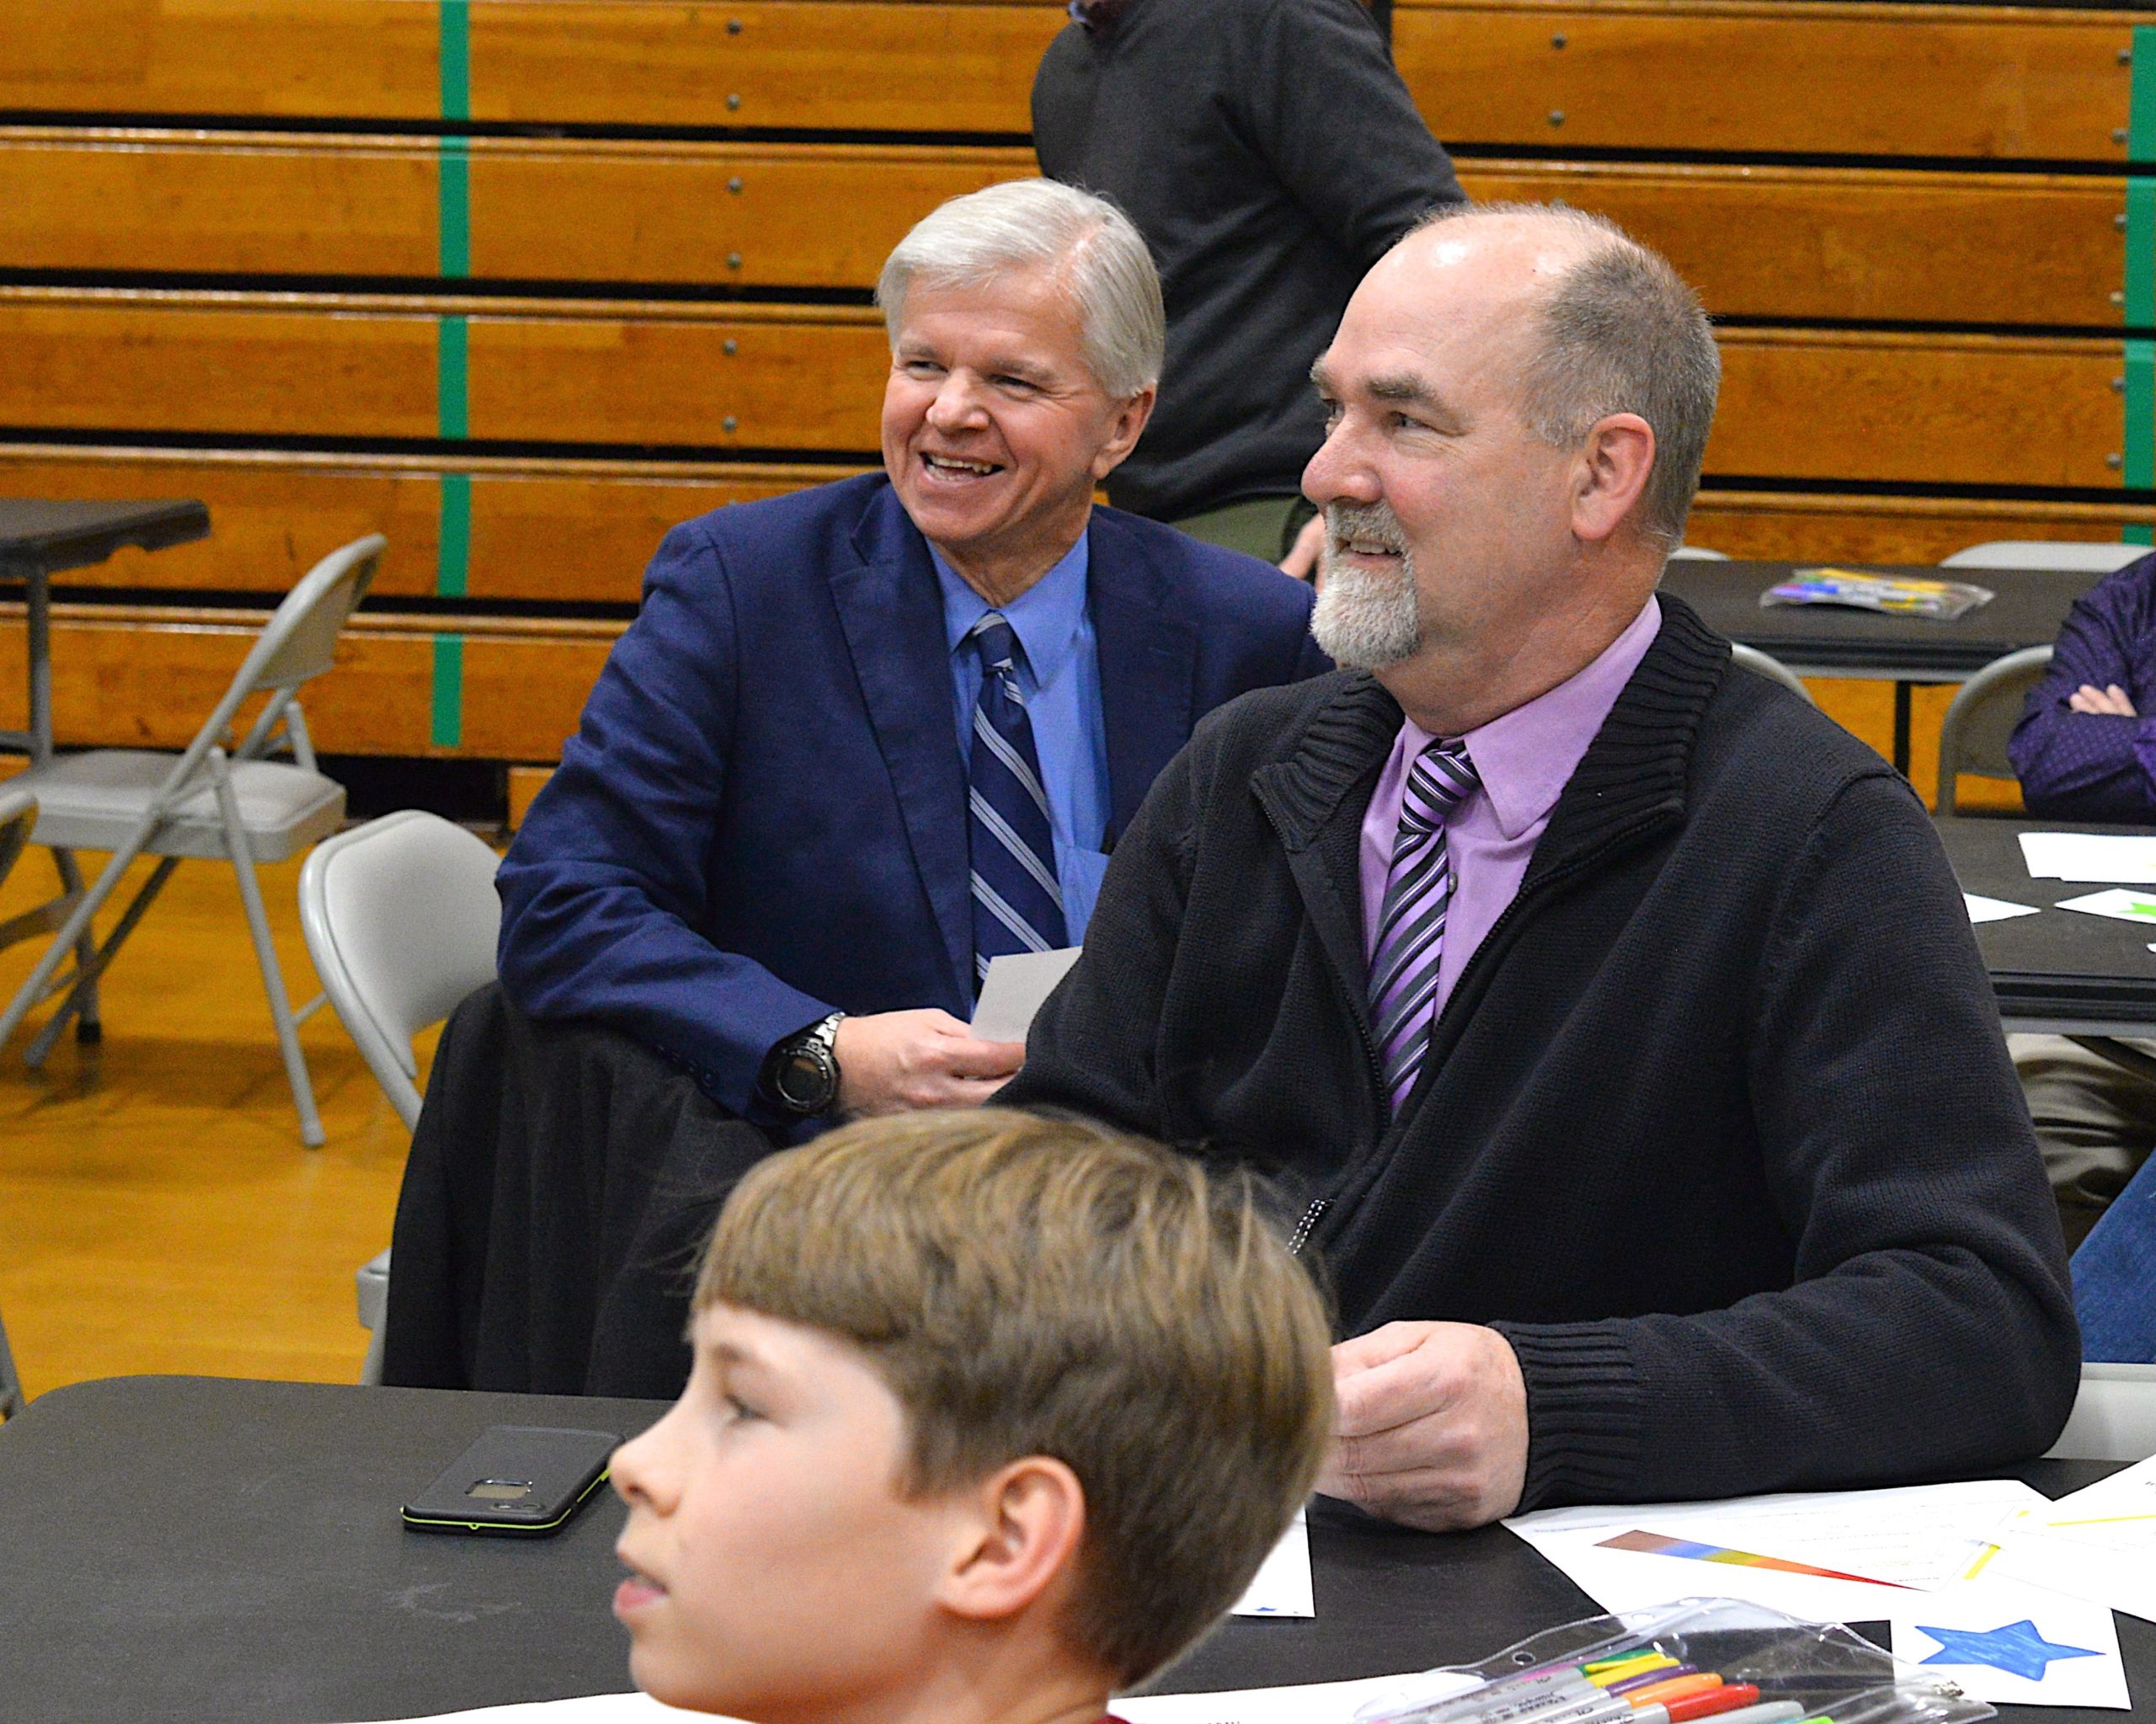 Assemblyman Fred W. Thiele Jr. and East Hampton Town Supervisor Peter Van Scoyoc listen to a presentation at the Springs School Diversity Institute on Friday. KYRIL BROMLEY